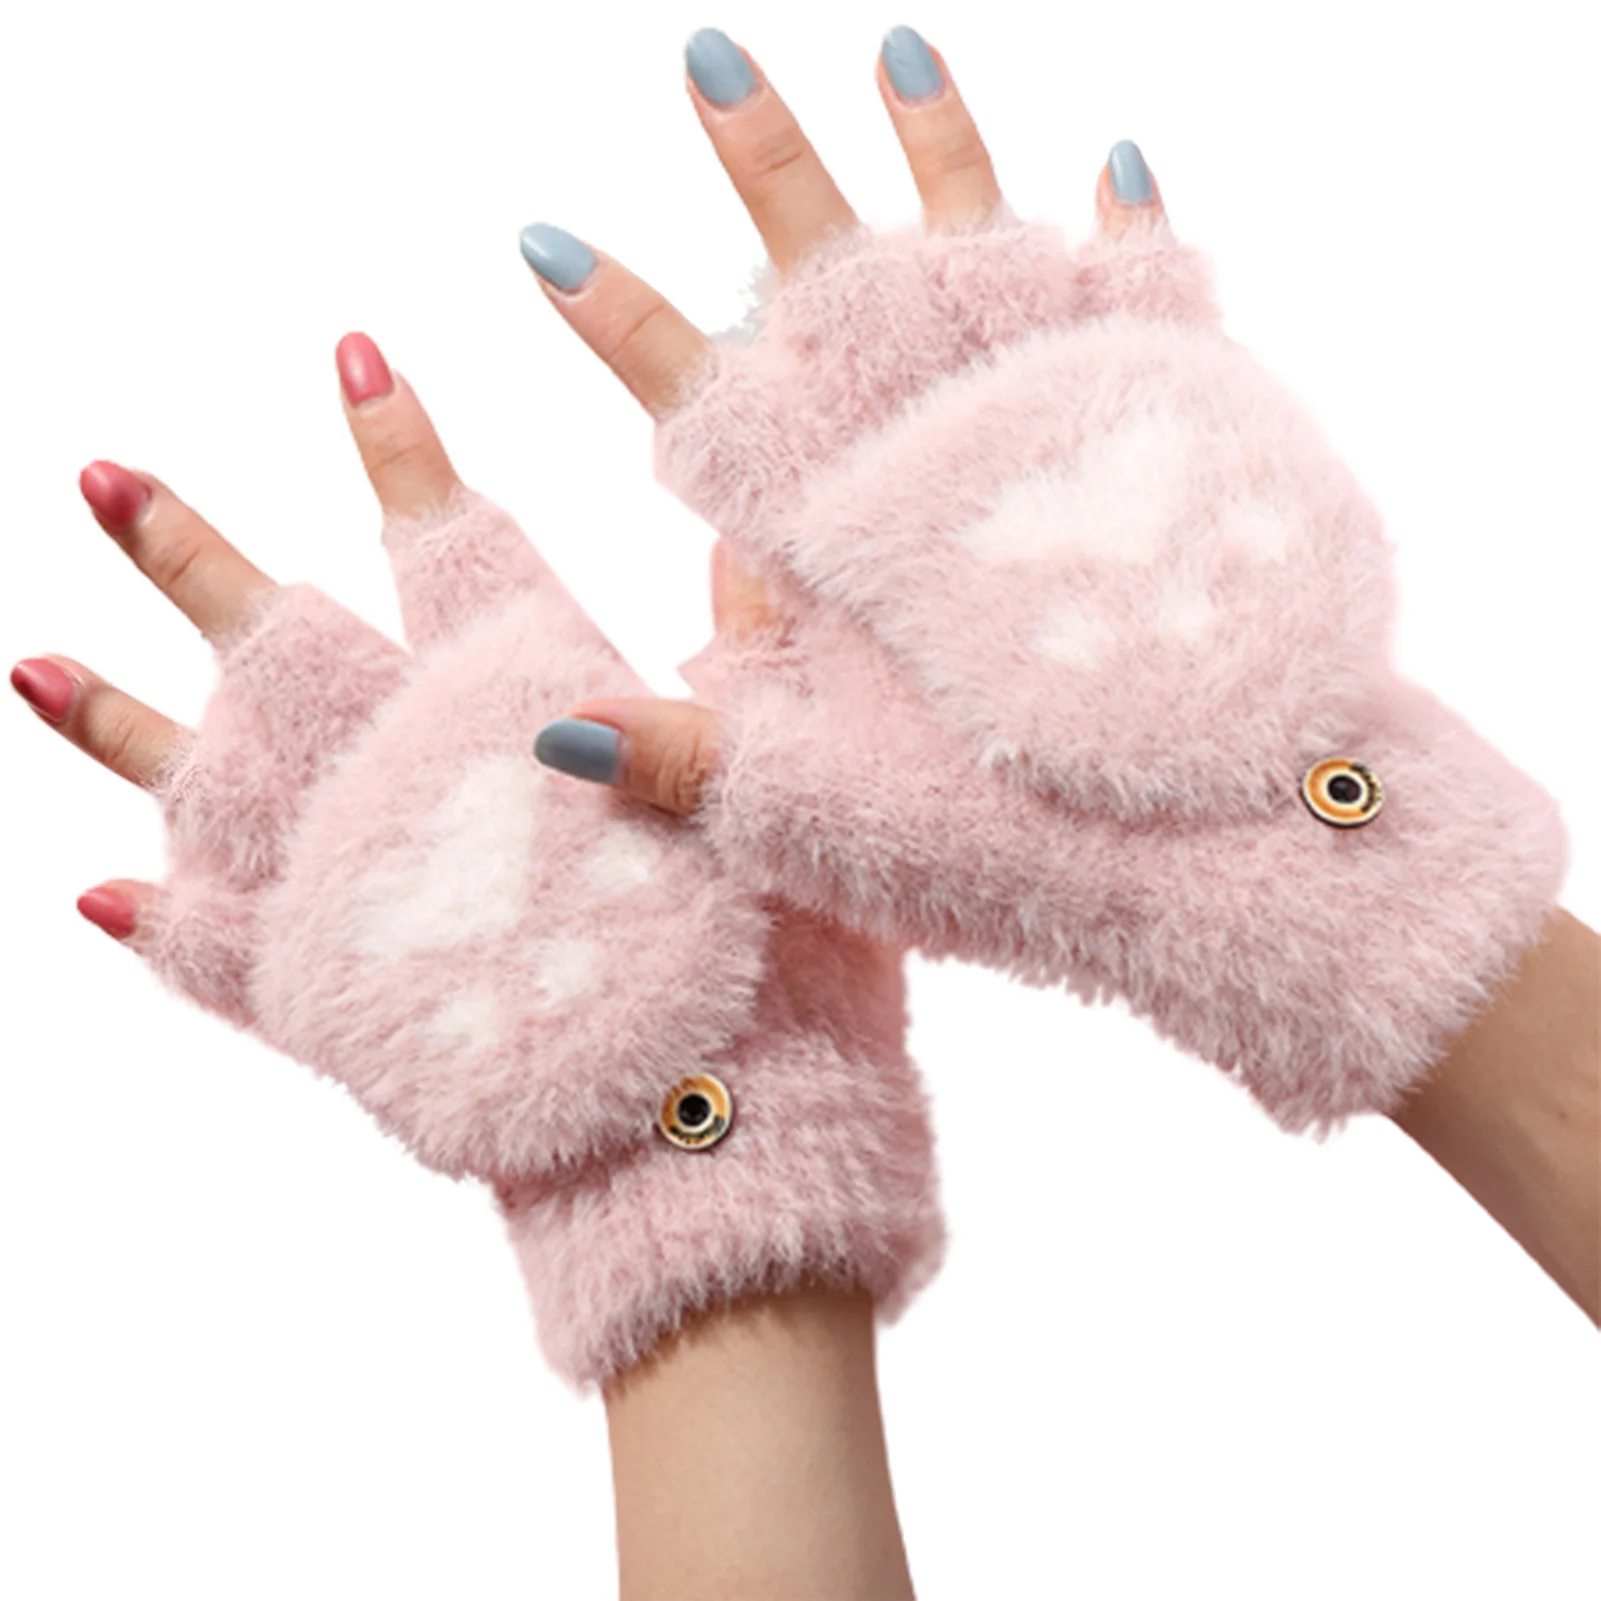 

Plush Kawaii Cat Paw Gloves Thermal Insulation Warm Convertible Fingerless Gloves for Cold Weather Winter